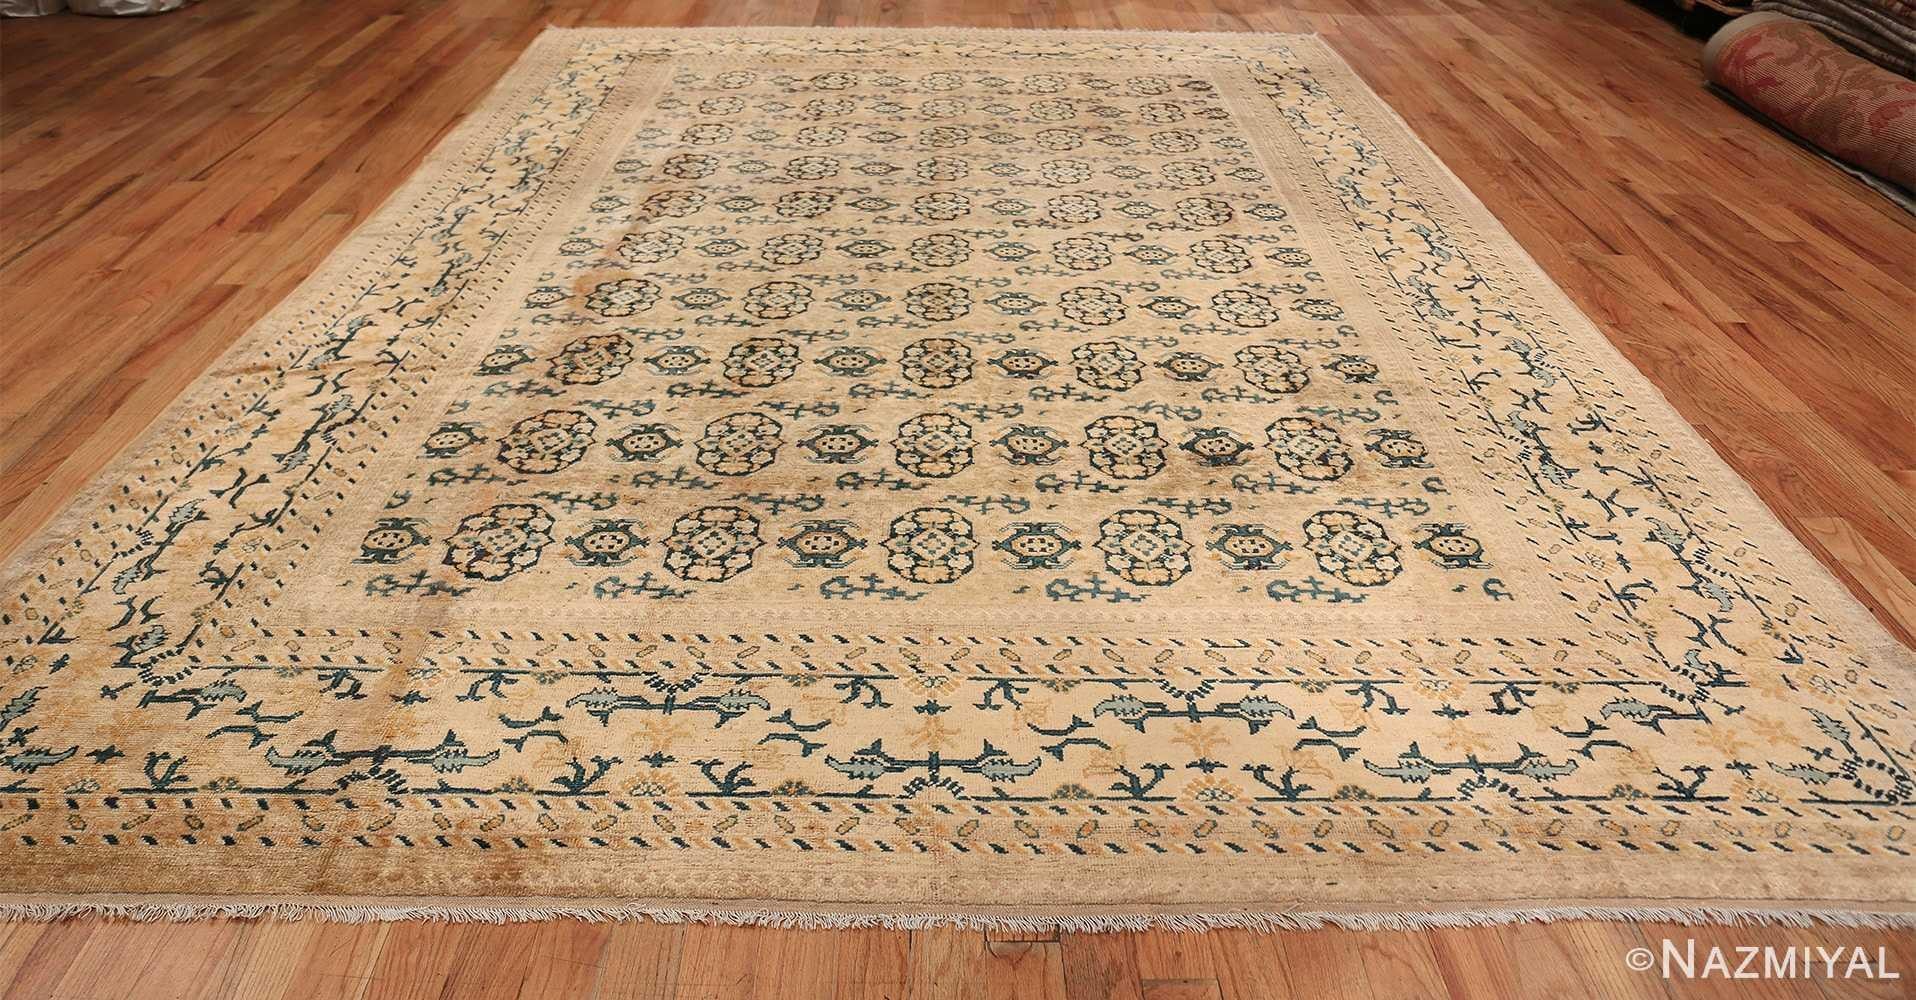 Rare and Extremely Decorative Antique Room Size Khotan Rug 9'5